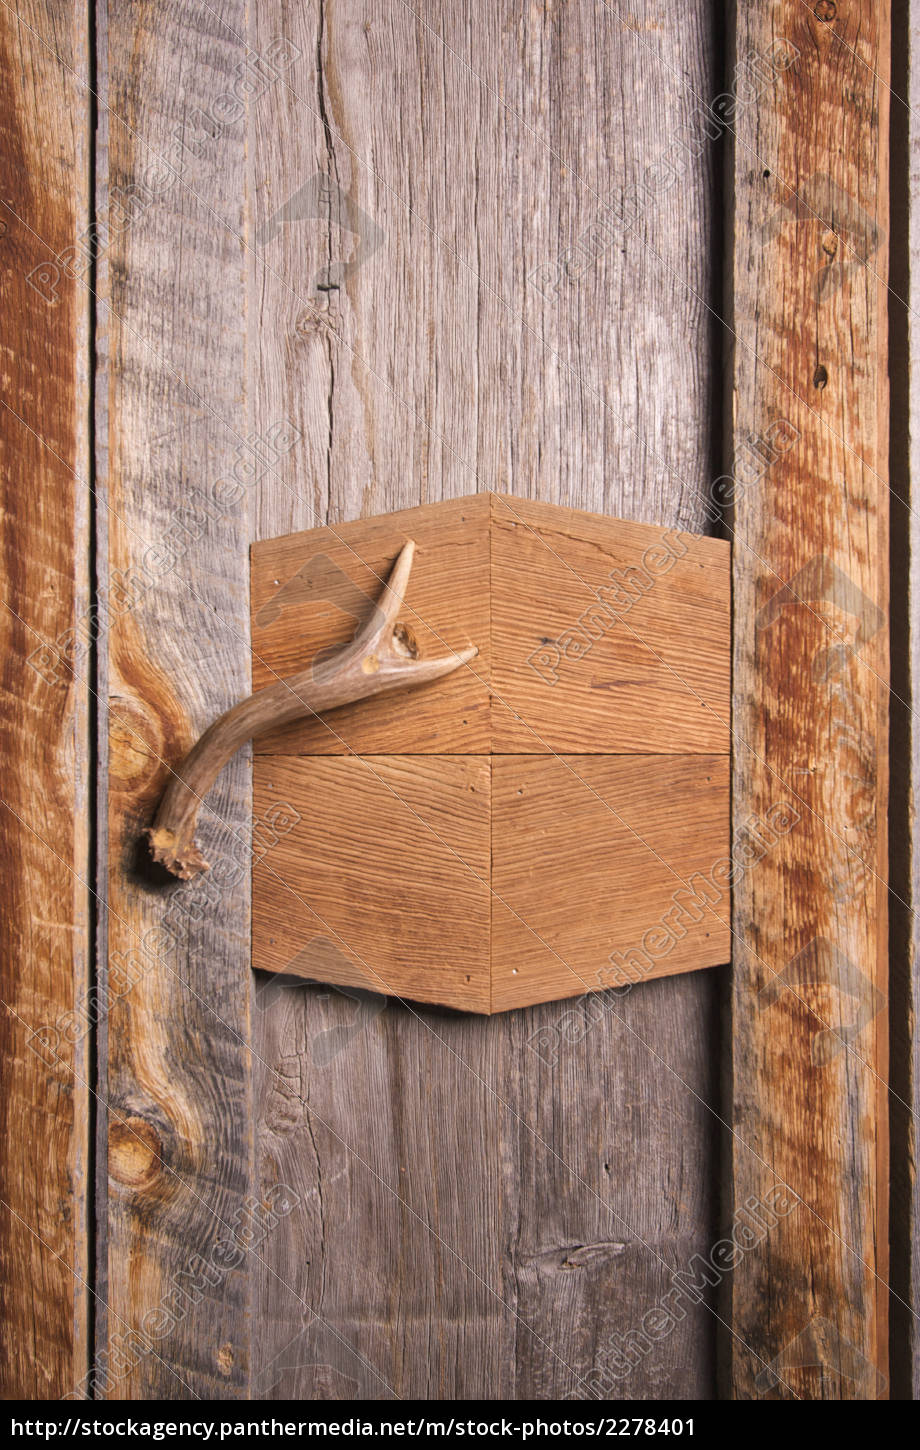 Rustic Cabinet With Antler Handle Royalty Free Image 2278401